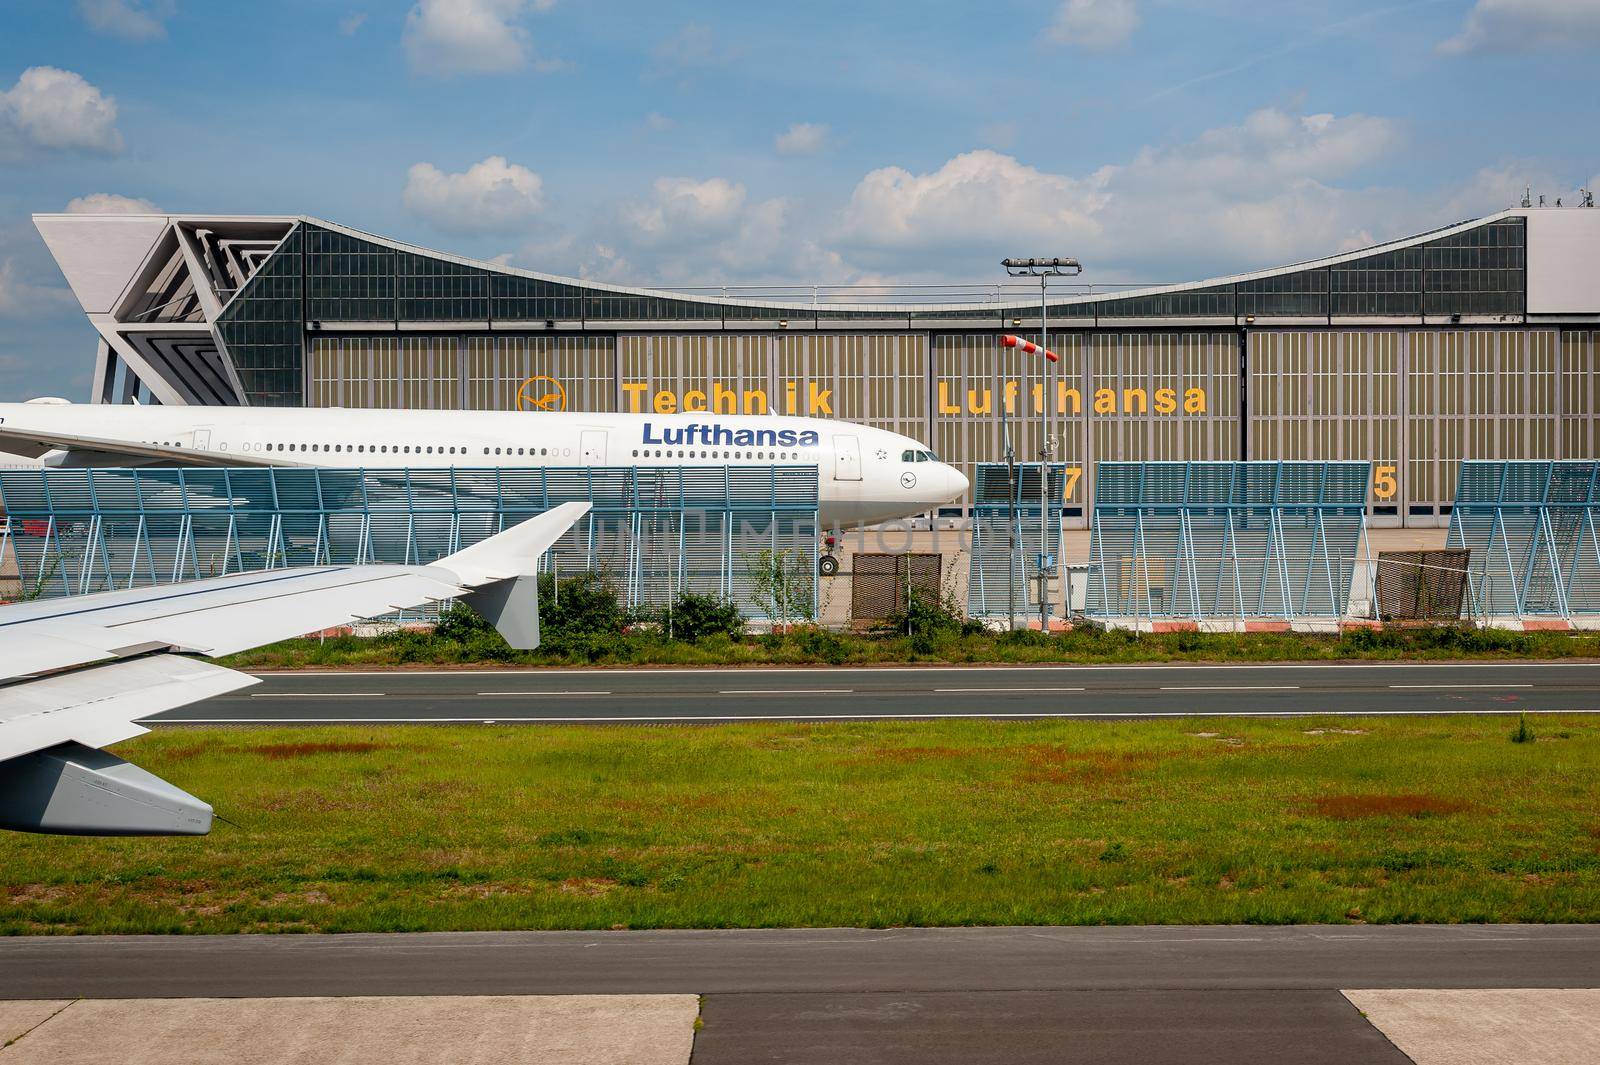 05/26/2019. Frankfurt Airport, Germany. Airbus by Lufthansa Technik maintenance hangar. Operated by Fraport and serves as the main hub for Lufthansa including Lufthansa City Line and Lufthansa Cargo. by Qba